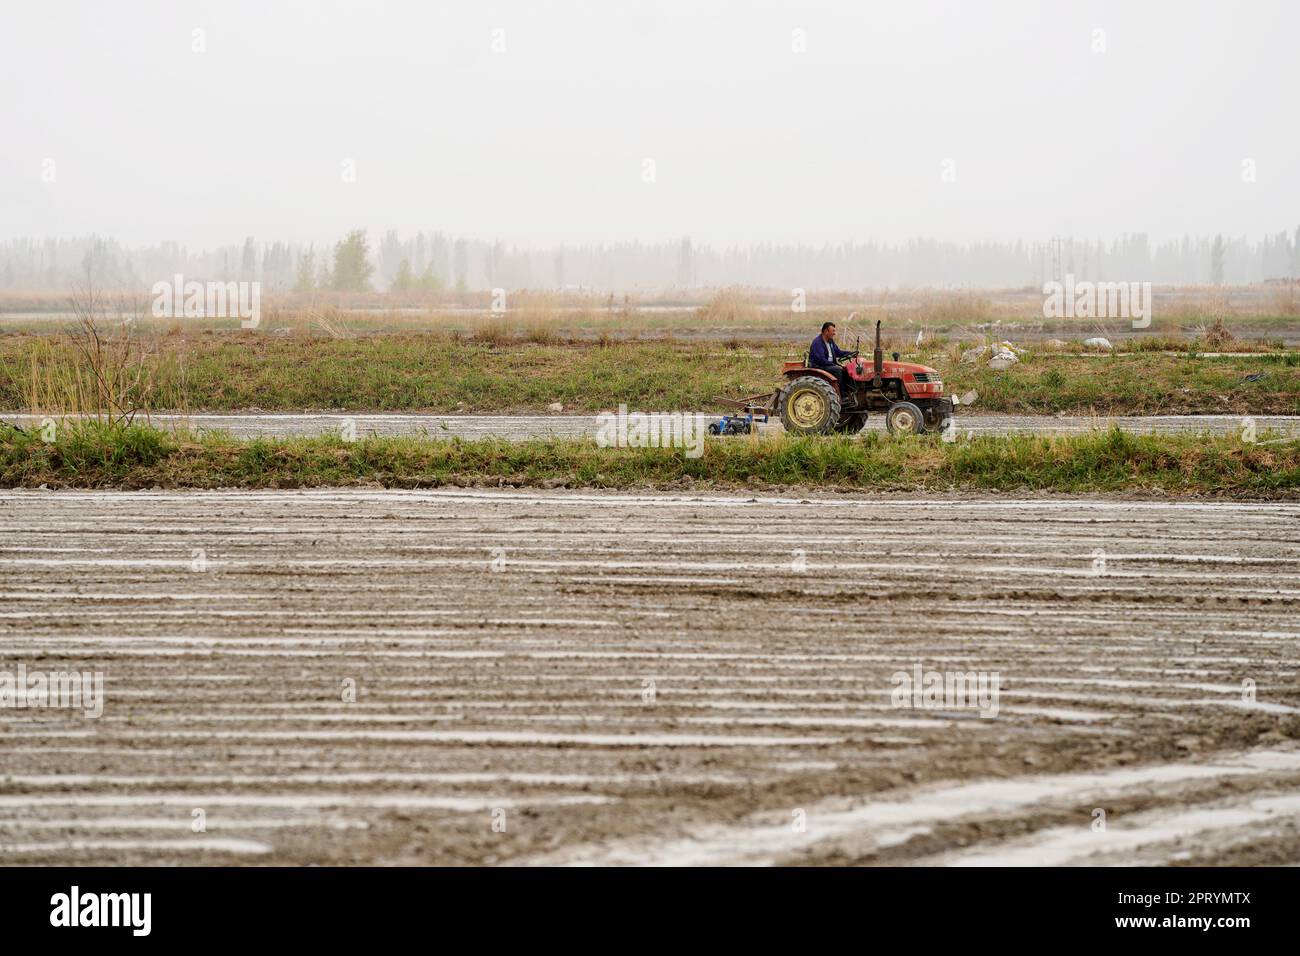 (230427) -- YULI, April 27, 2023 (Xinhua) -- Arkin Reyim drives a tractor to work at a cotton field in the Bax Mali Village of Yuli County, northwest China's Xinjiang Uygur Autonomous Region, April 22, 2023.  Arkin Reyim is a 51-year-old cotton farmer with more than 300 mu (20 hectares) of cotton fields in the Bax Mali Village of Yuli County in Xinjiang.     Arkin's courage and unique vision has prompted him to start growing cotton in 2004 when he got married with his wife Hasiyat Kasim. Since then, Arkin has devoted himself into the cultivation of cotton for over 10 years, thus making him an Stock Photo